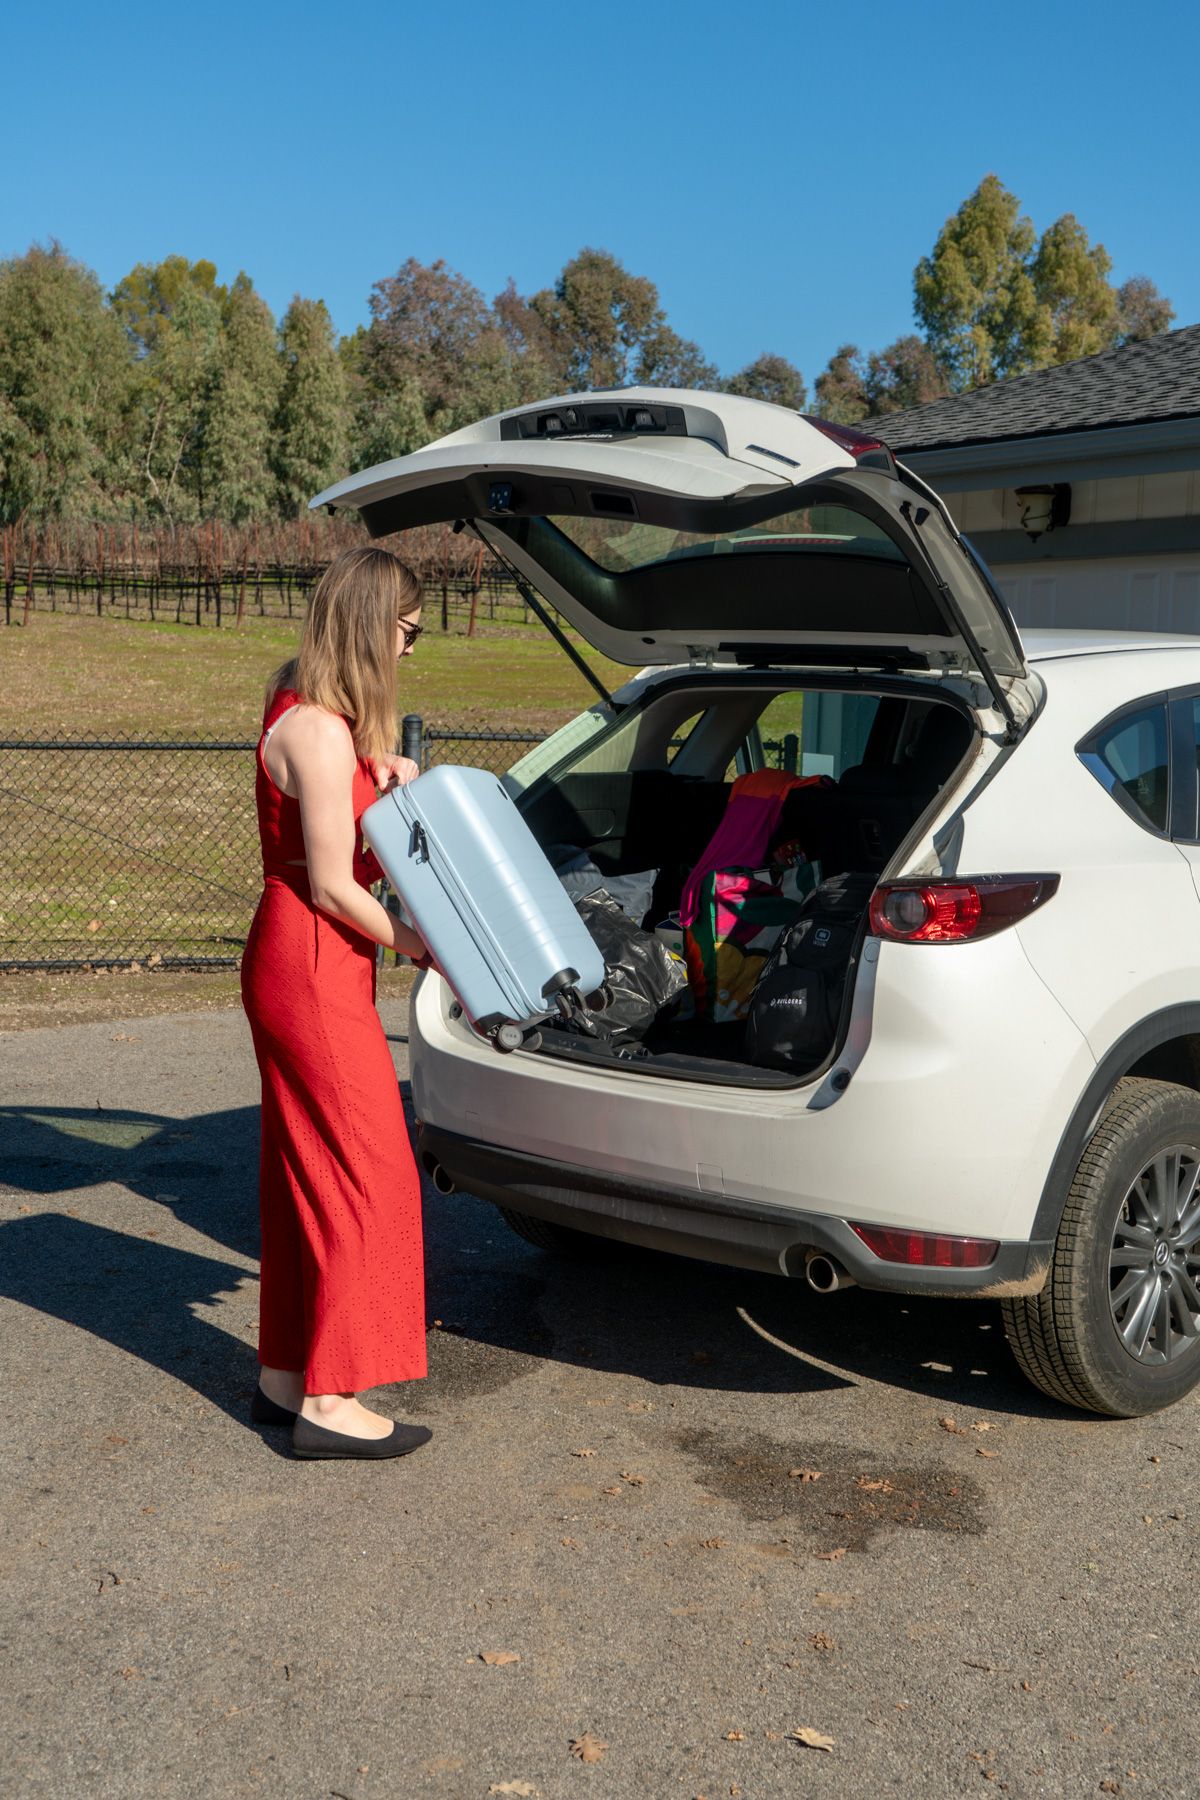 A woman in a red jumpsuit loads a blue suitcase into the hatchback of a white SUV parked in a driveway on a sunny day.